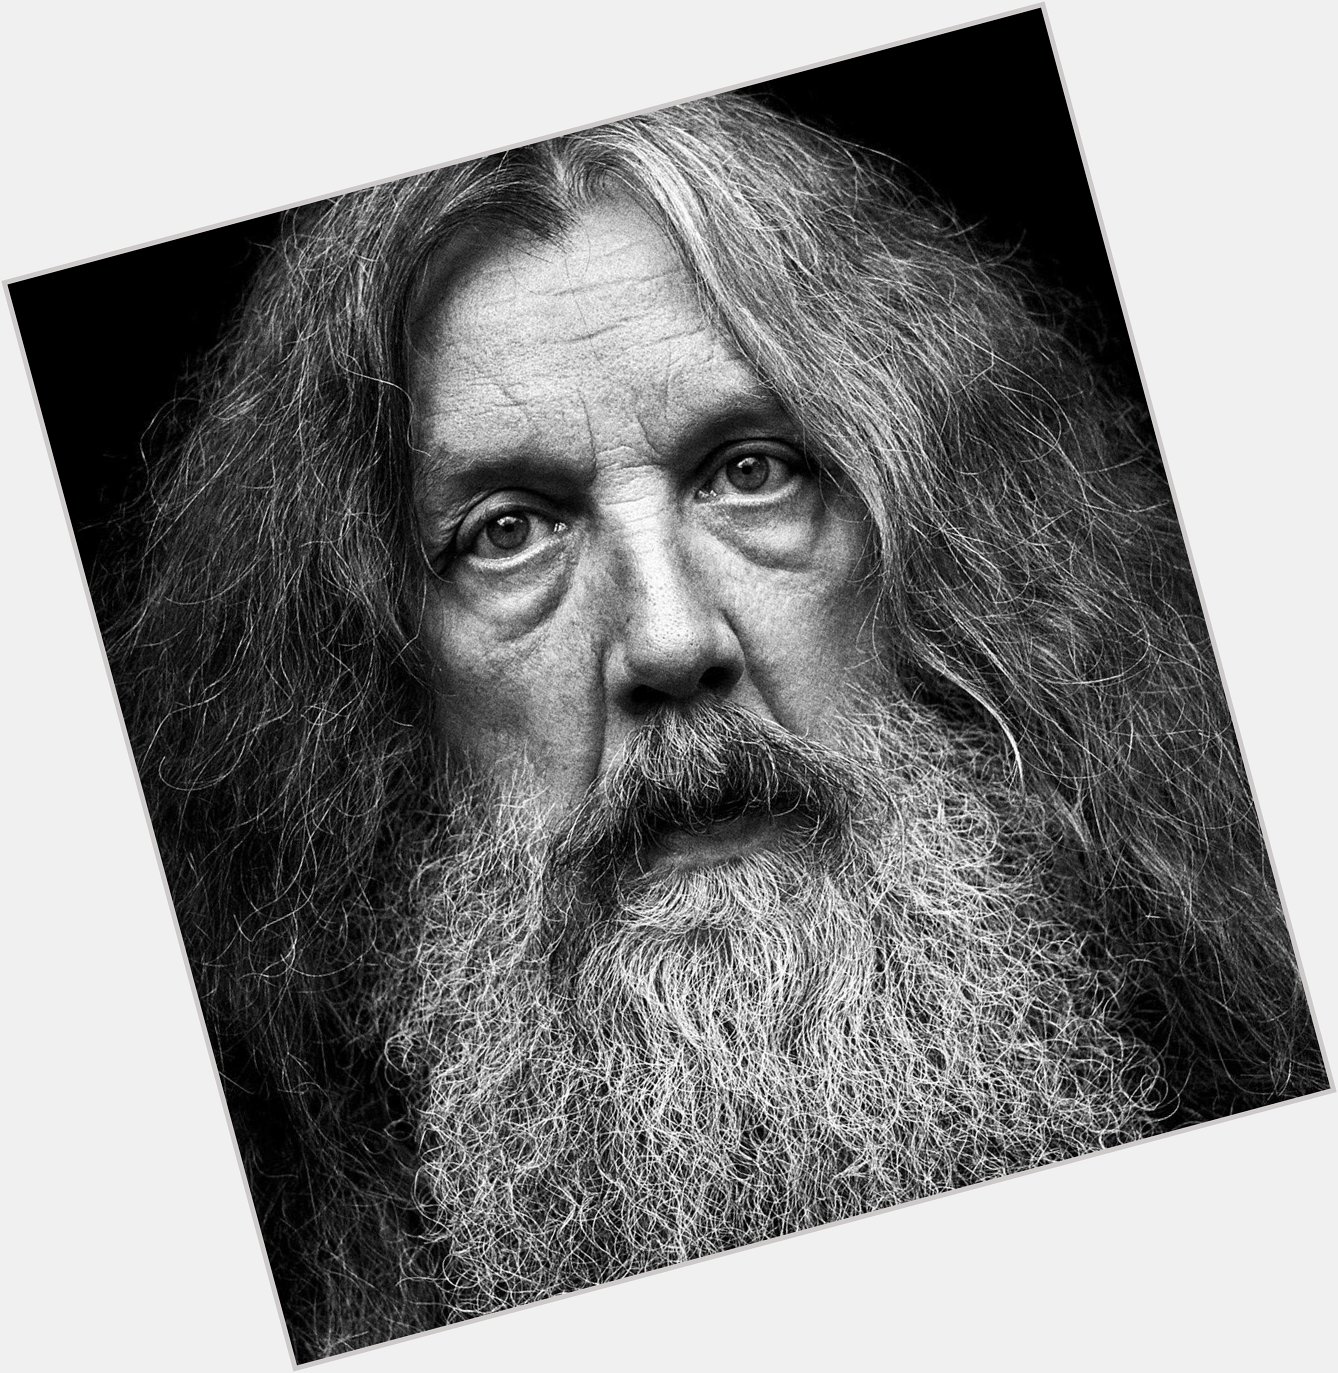 Happy birthday to writer, rebel soul, and soon to be matinee idol, Alan Moore. 